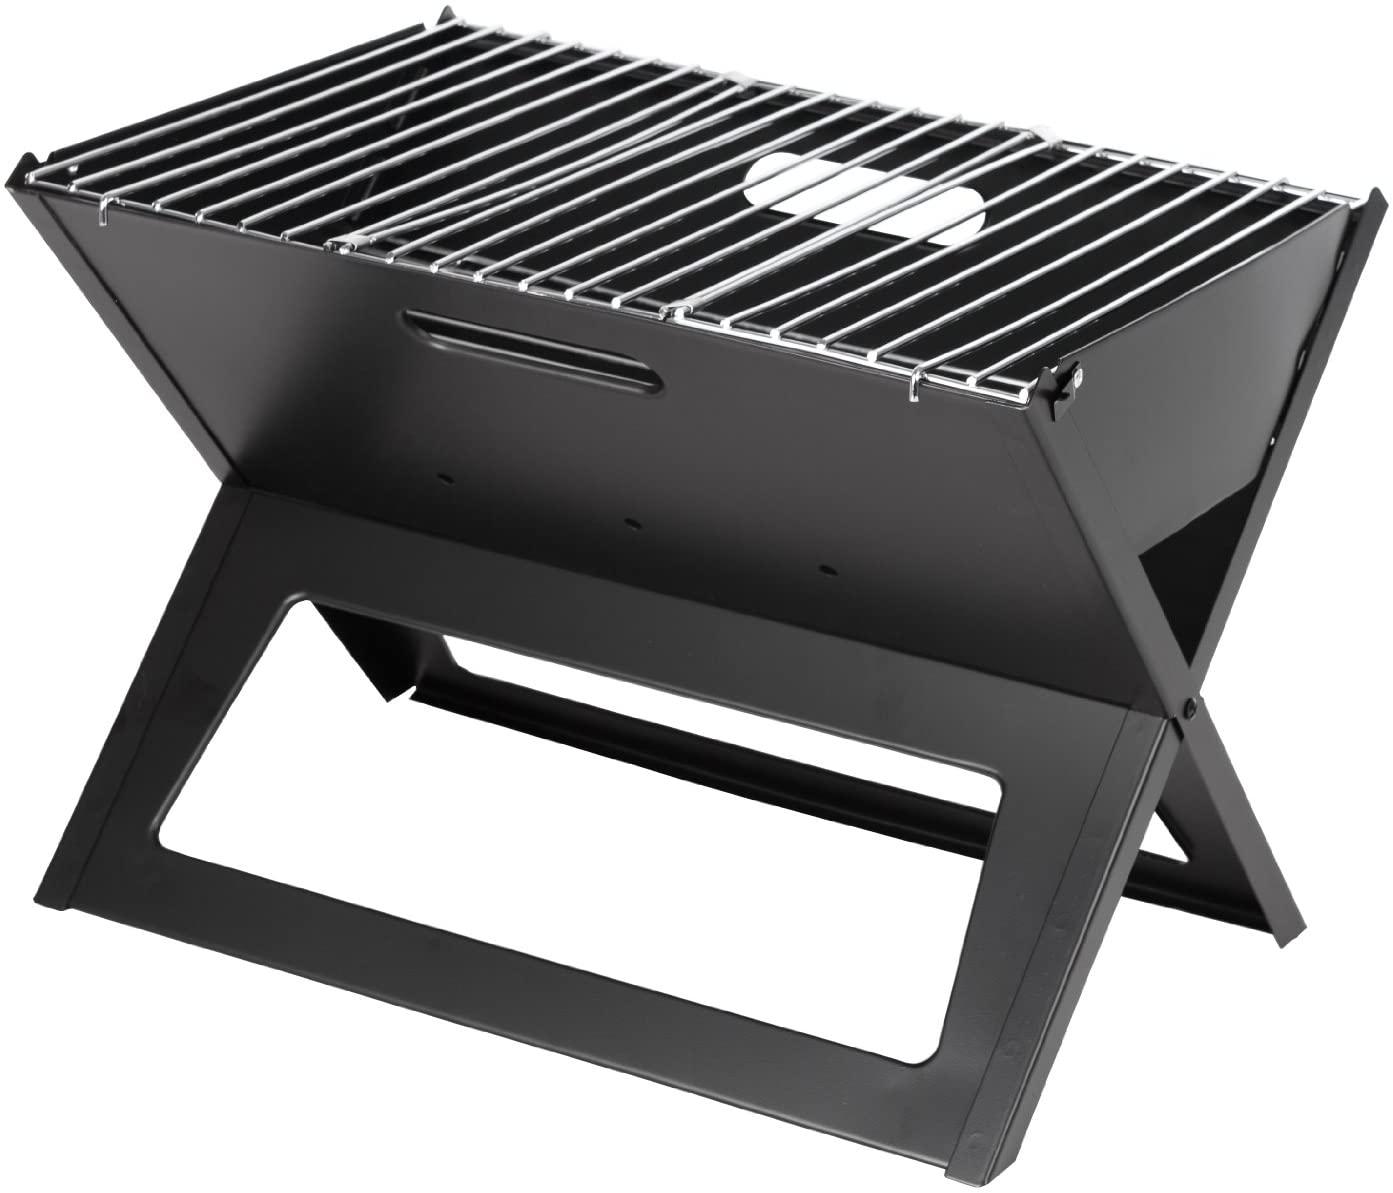 Fire Sense Notebook Charcoal Grill for $24.99